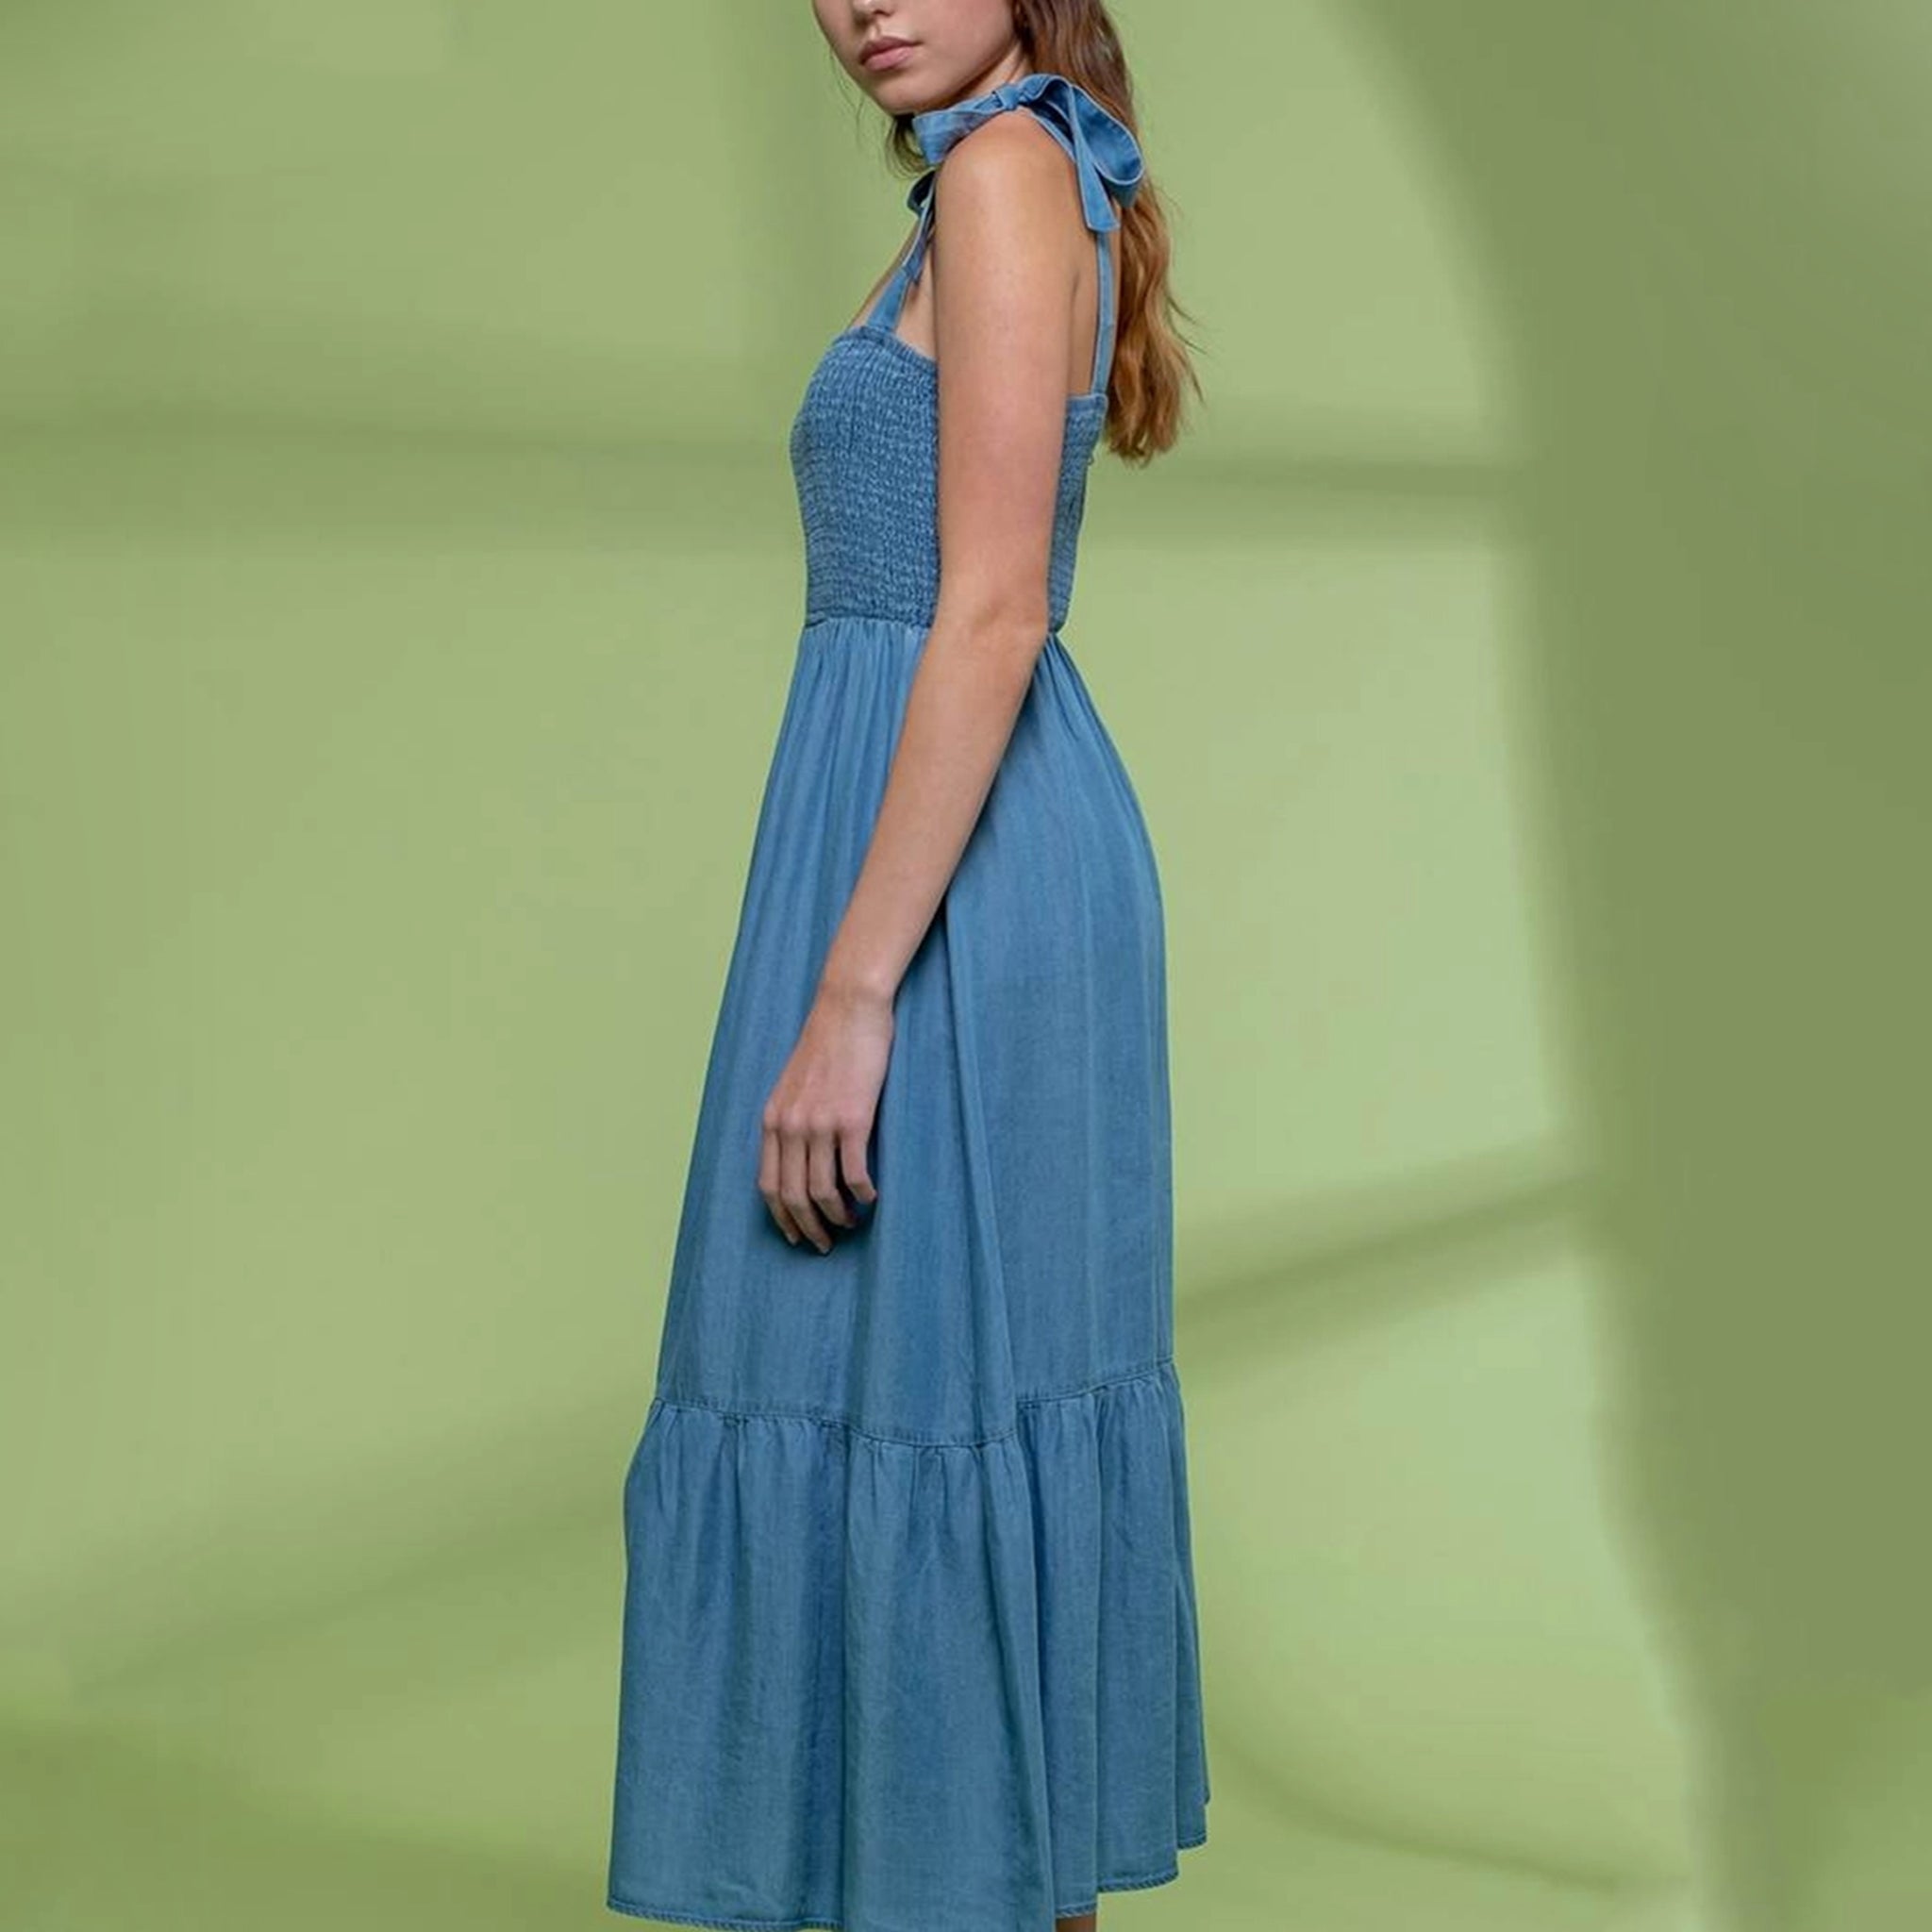 On a green shadow background is a model wearing a blue flowy midi dress with tie shoulder straps and a square neckline. 